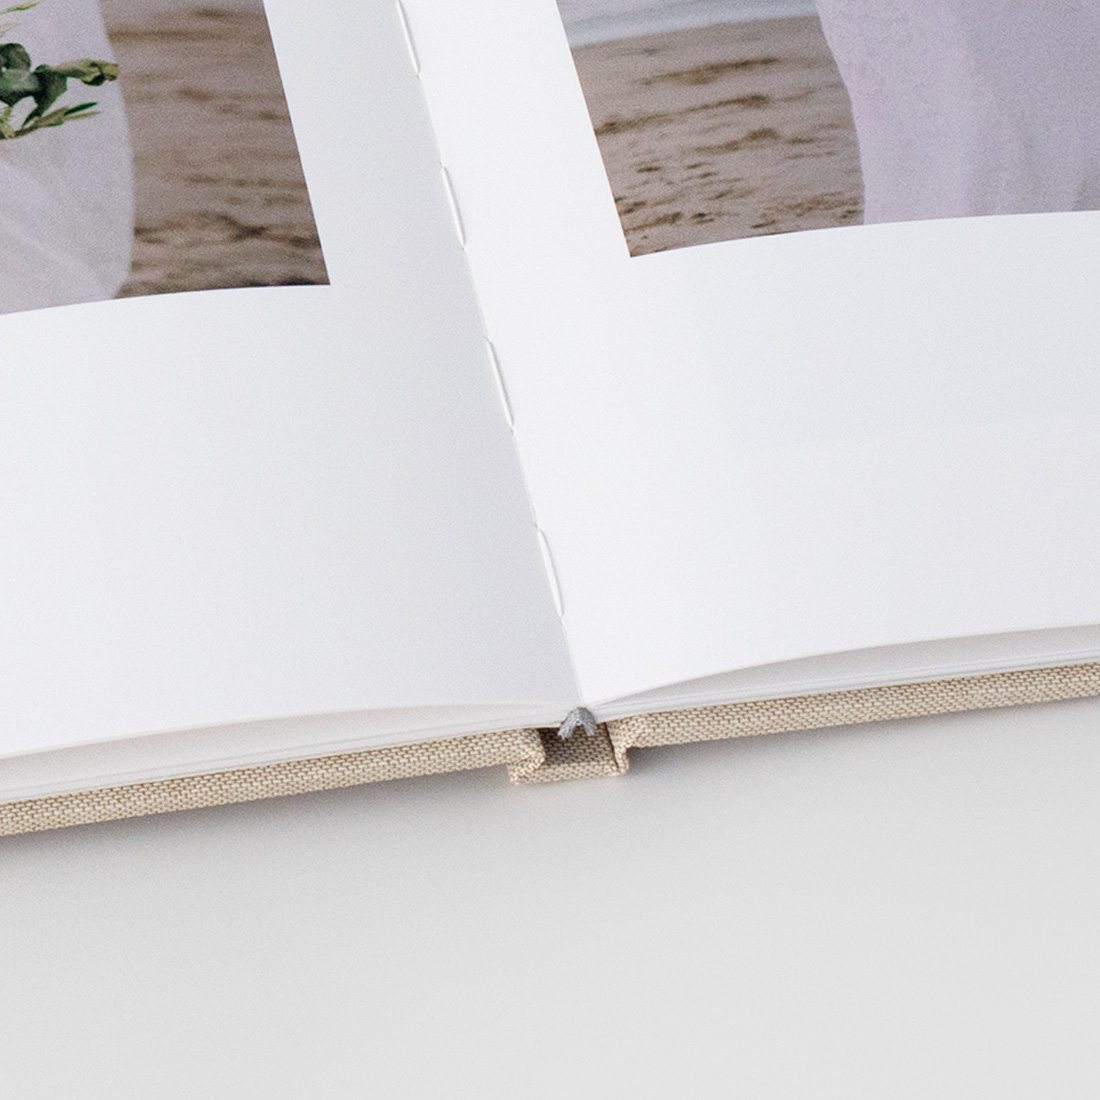 MILK Books - High Quality Handcrafted Photo Books & Albums